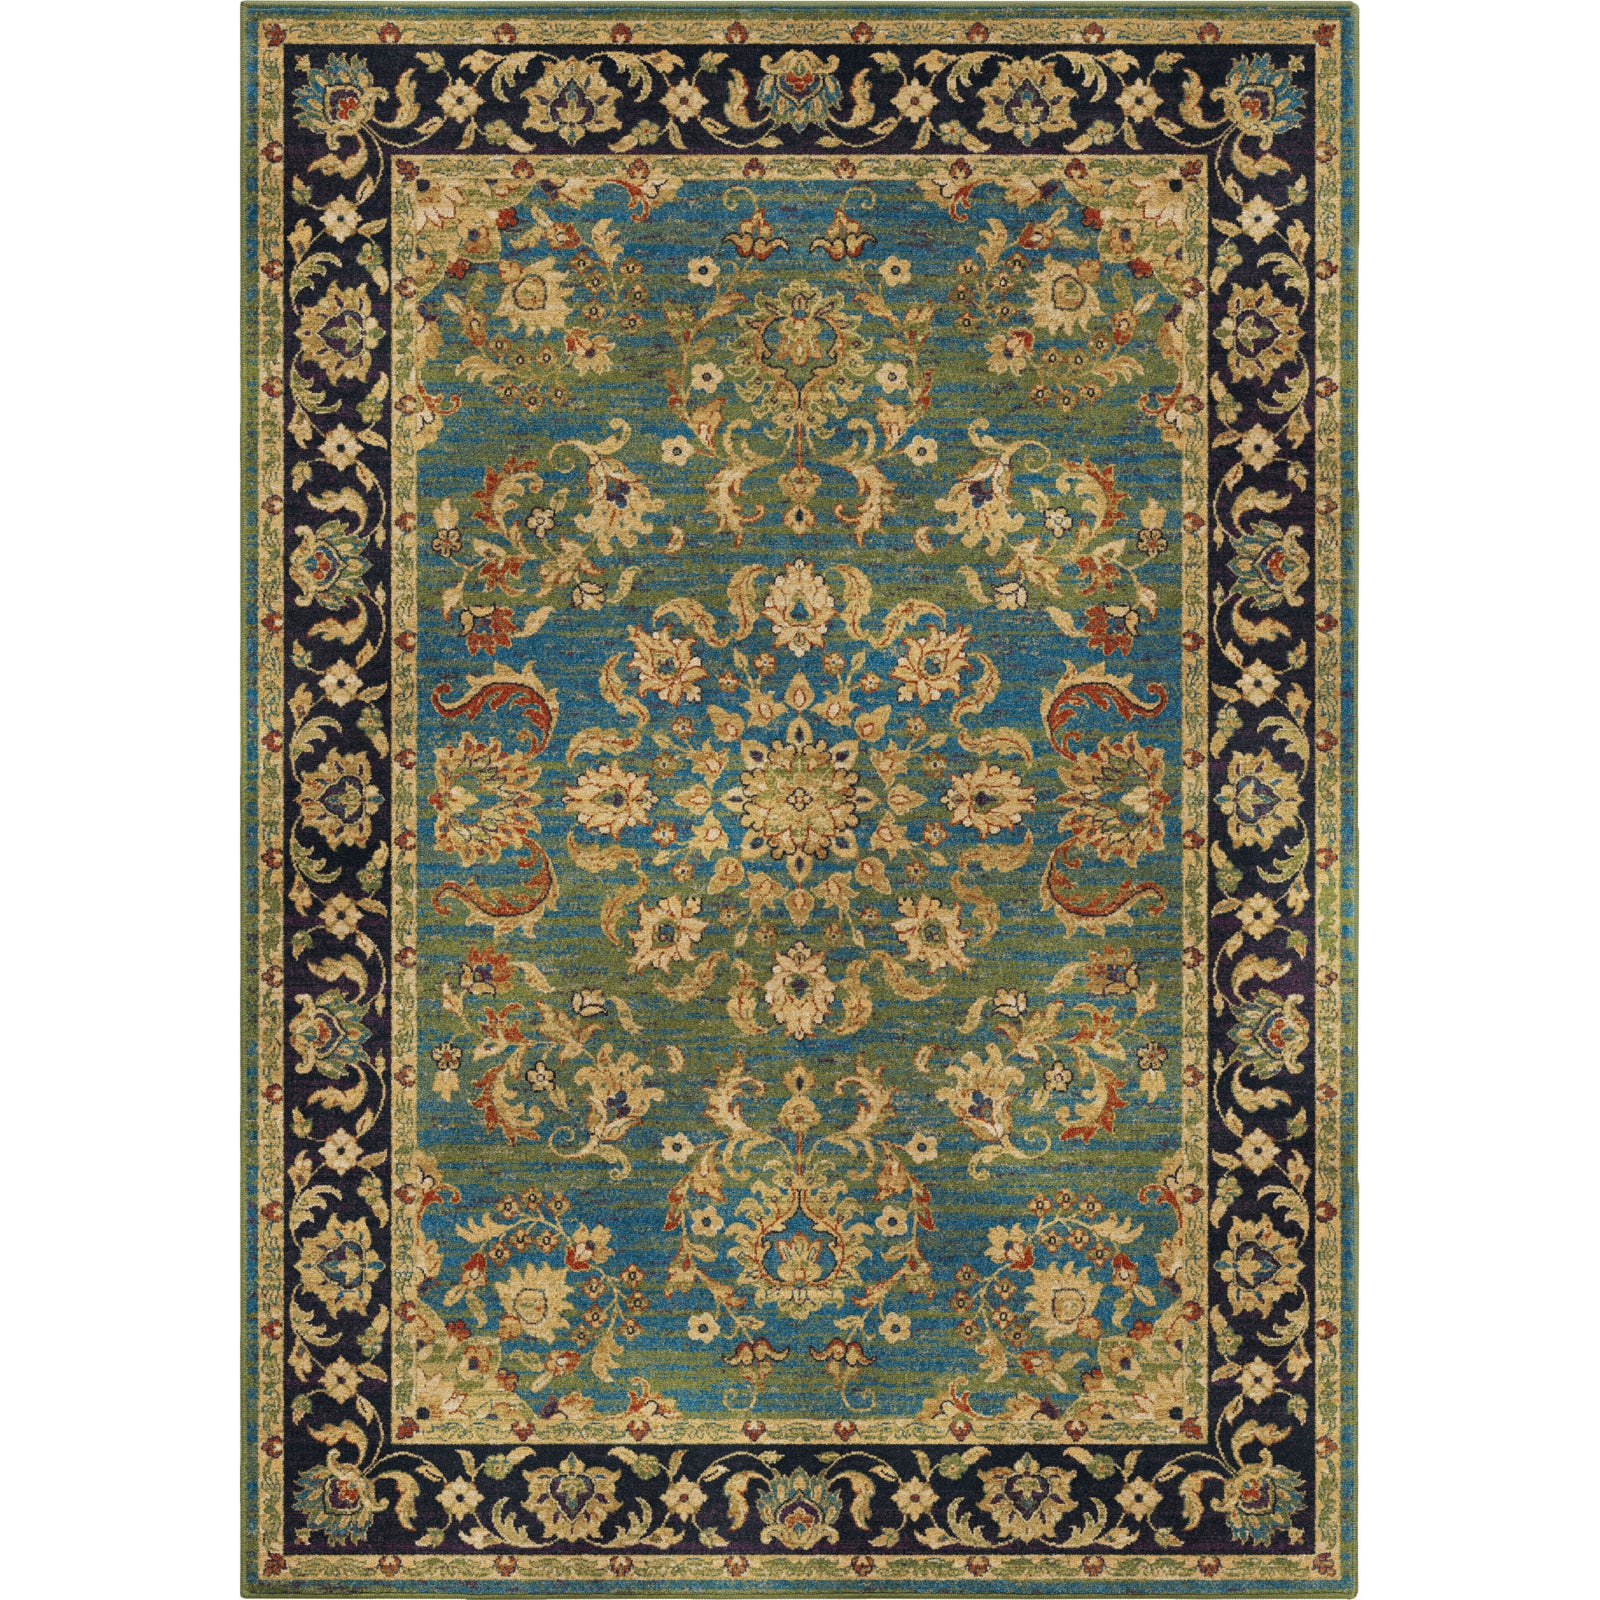 Orian Rugs Berkley Twisted Tradition Green Area Rug main image